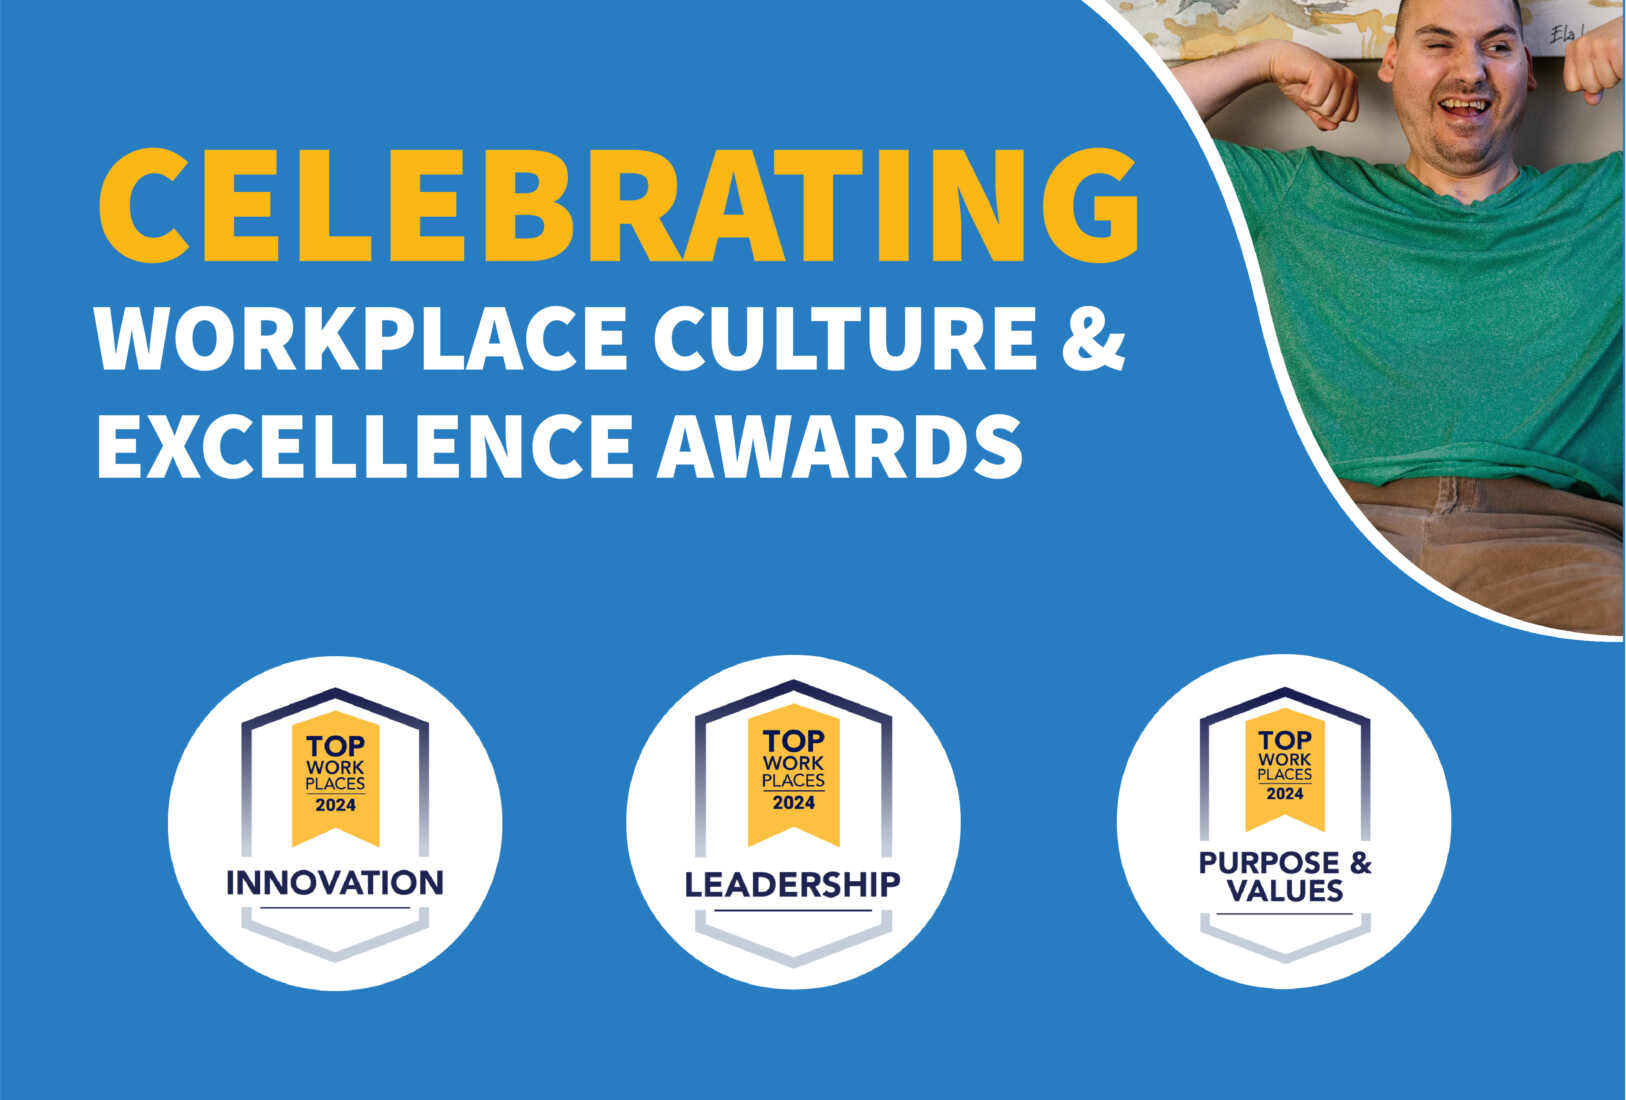 top workplaces awards. ACR Homes top workplace awards. ACR receives 3 key awards.